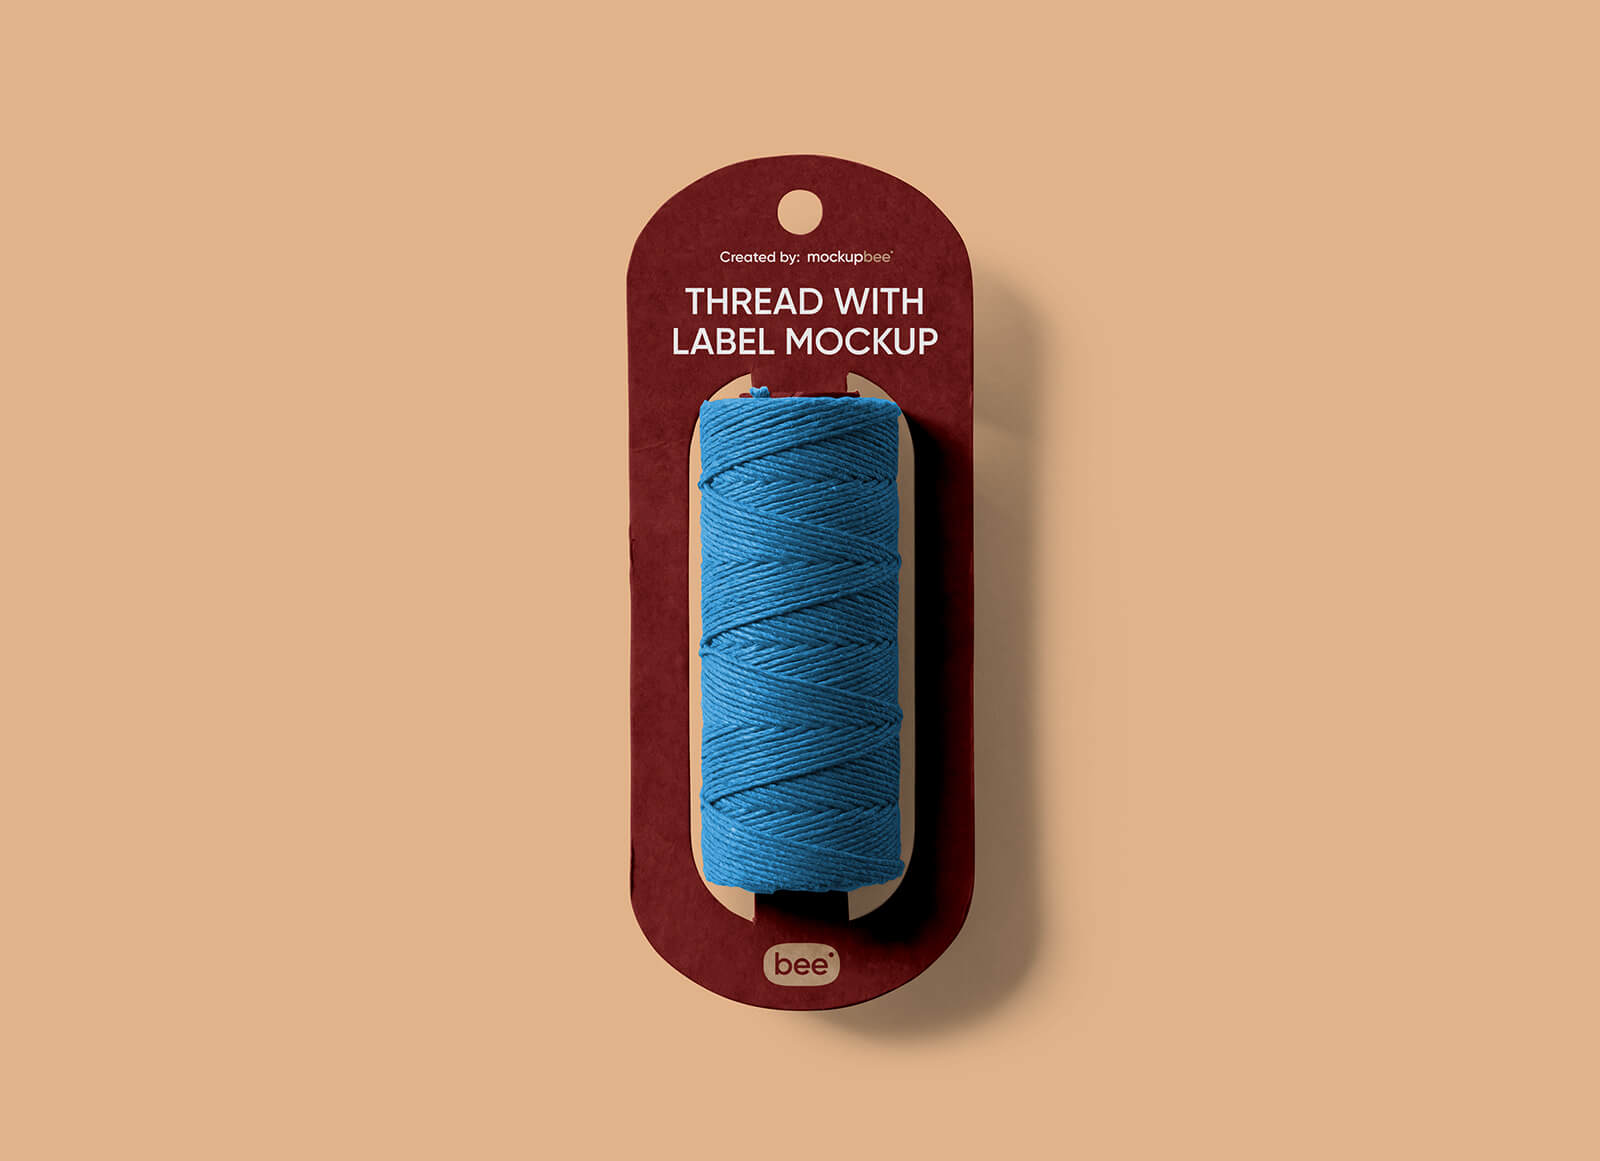 Sewing Thread Spool With Label Mockup